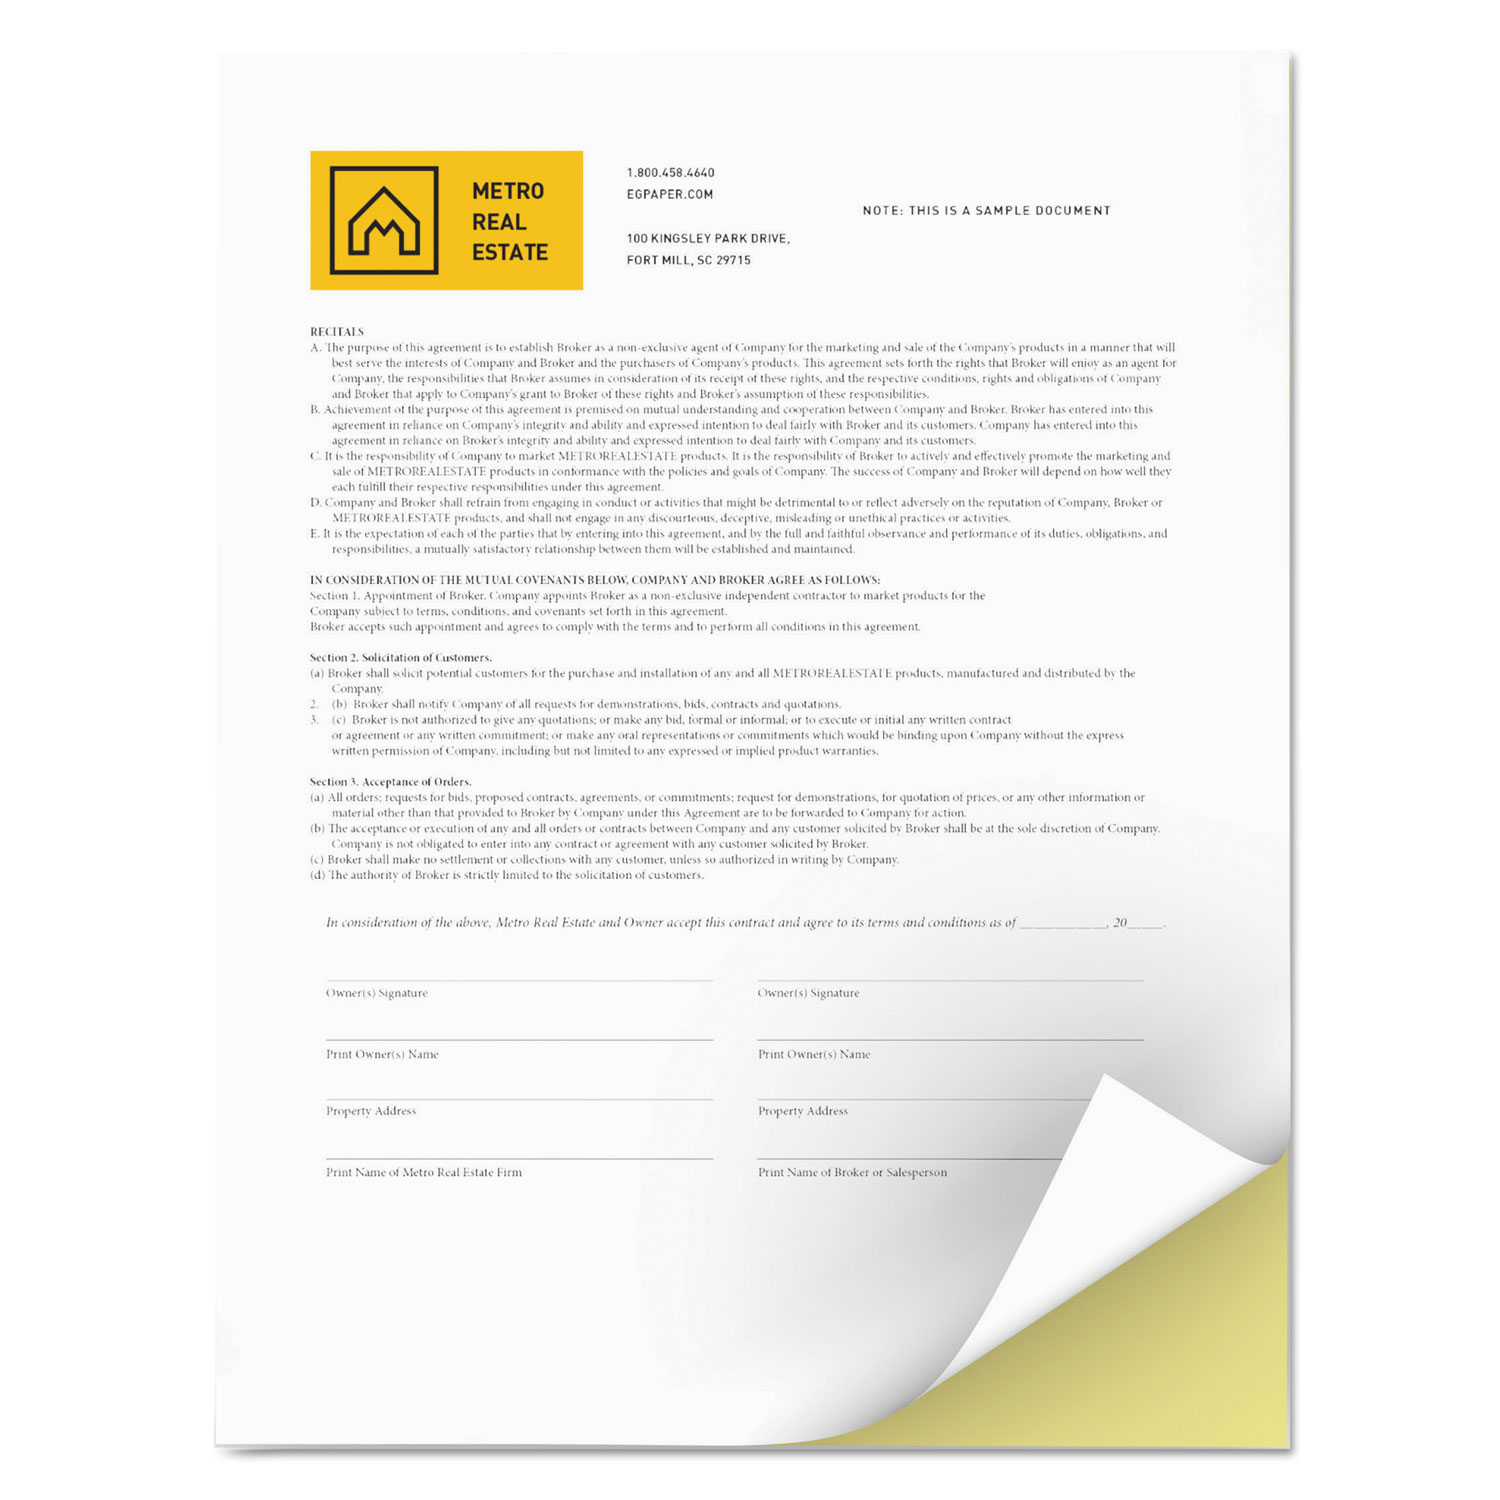 Revolution Digital Carbonless Paper, 8 1/2 x 11, White/Canary, 5,000 Sheets/CT